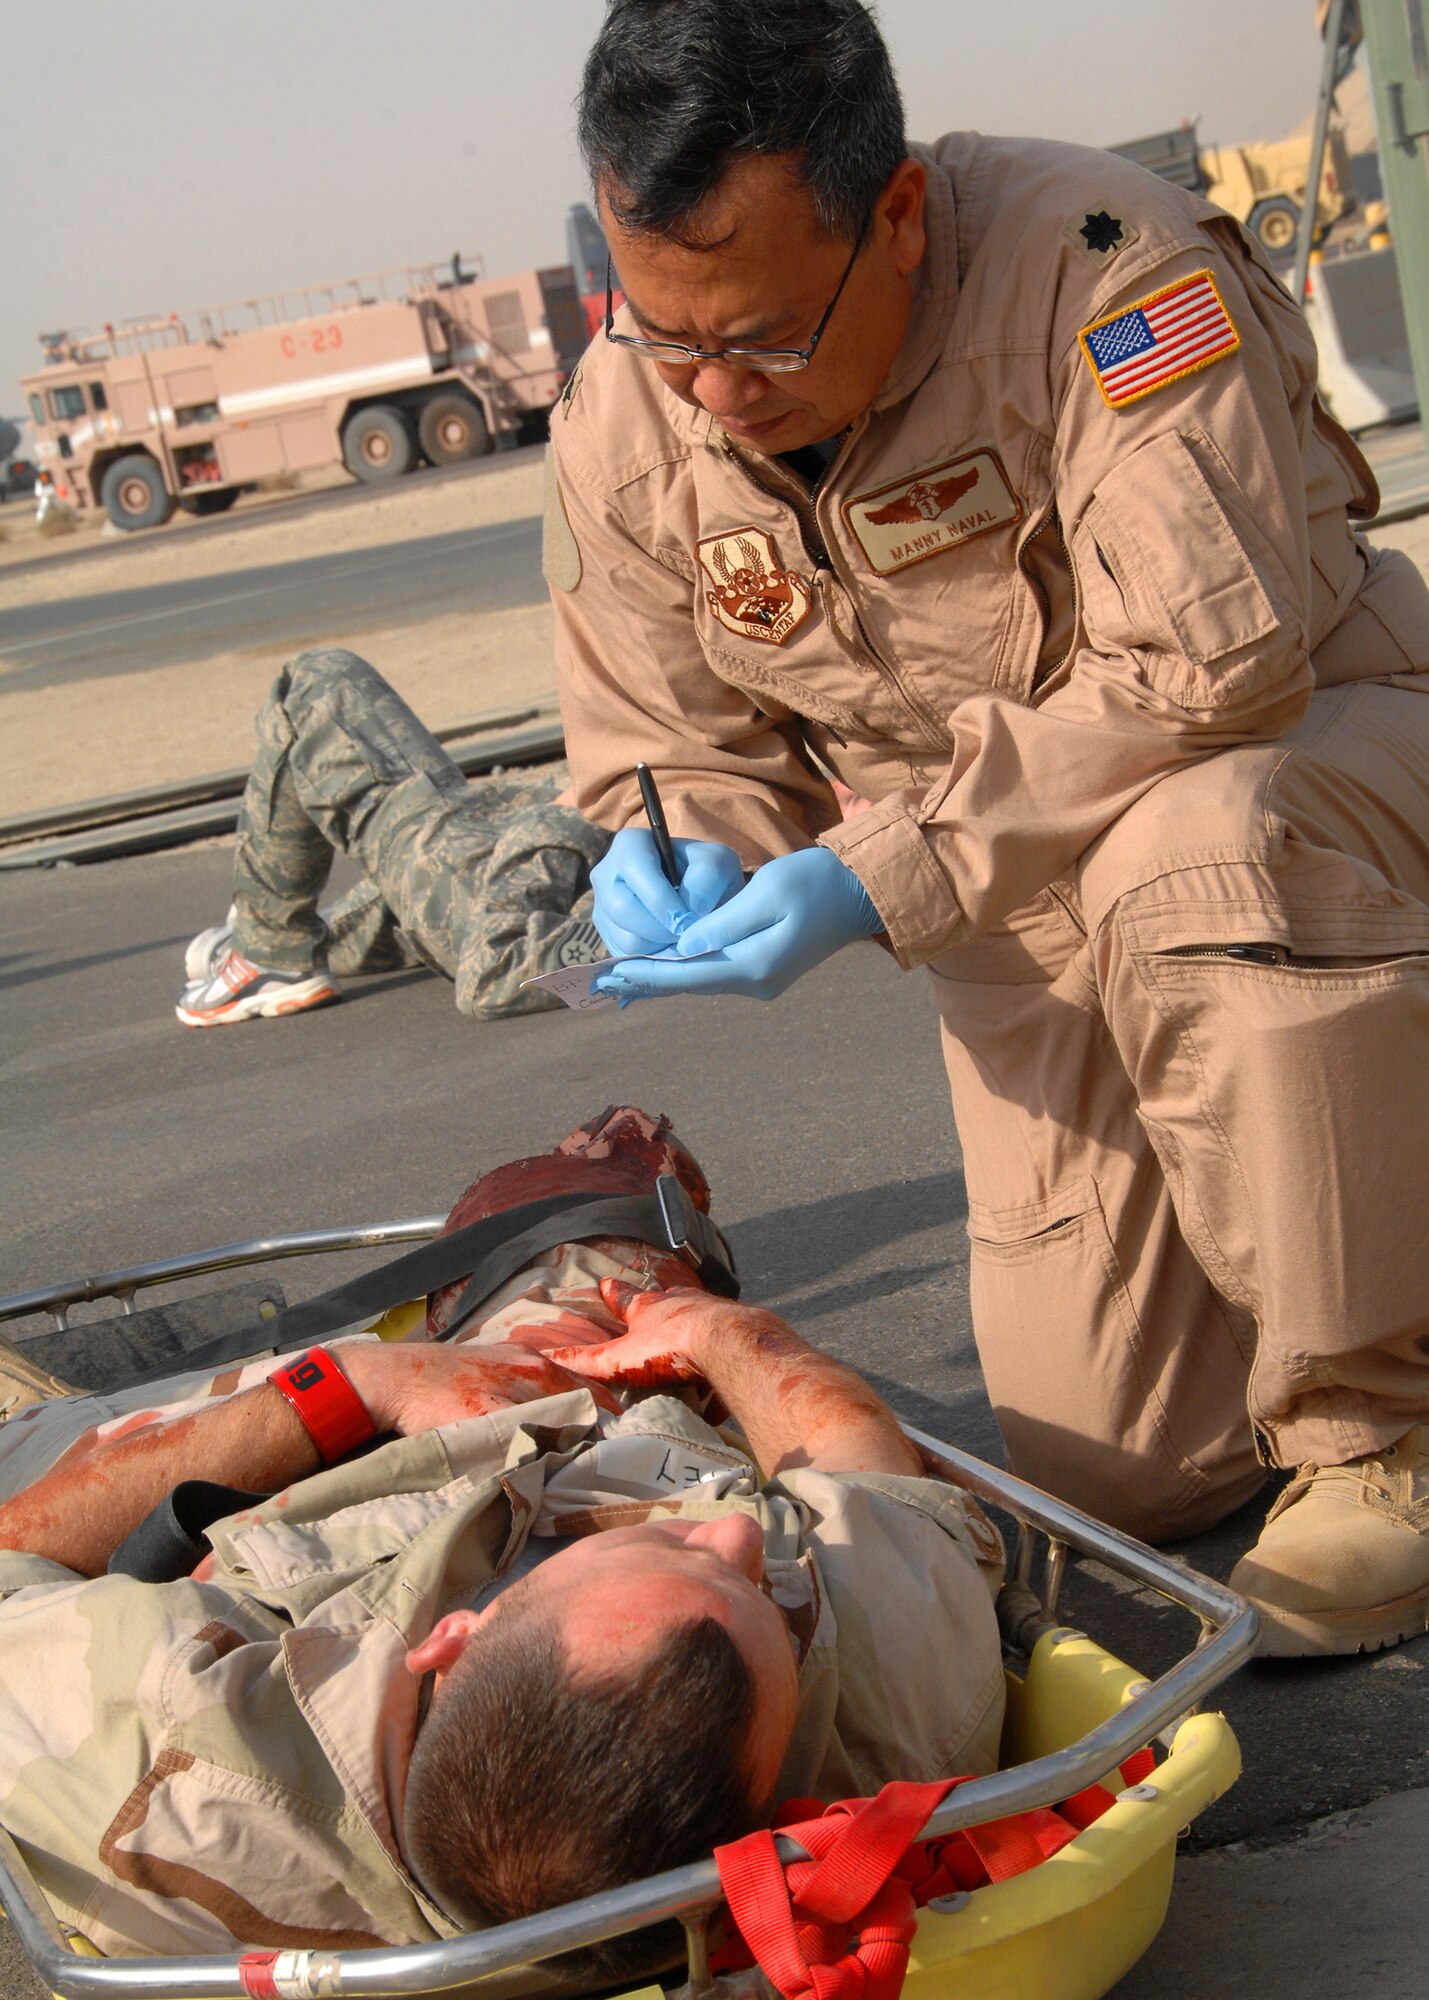 SOUTHWEST ASIA -- Lt. Col Manny Naval, 386th Expeditionary Medical Group, writes down vital information on a simulated accident victim during a mass casualty exercise on Oct. 29 at an air base in Southwest Asia. The exercise tested the 386th Air Expeditionary Wing's ability to respond to a major accident in a deployed environment. (U.S. Air Force photo/Tech. Sgt. Raheem Moore)